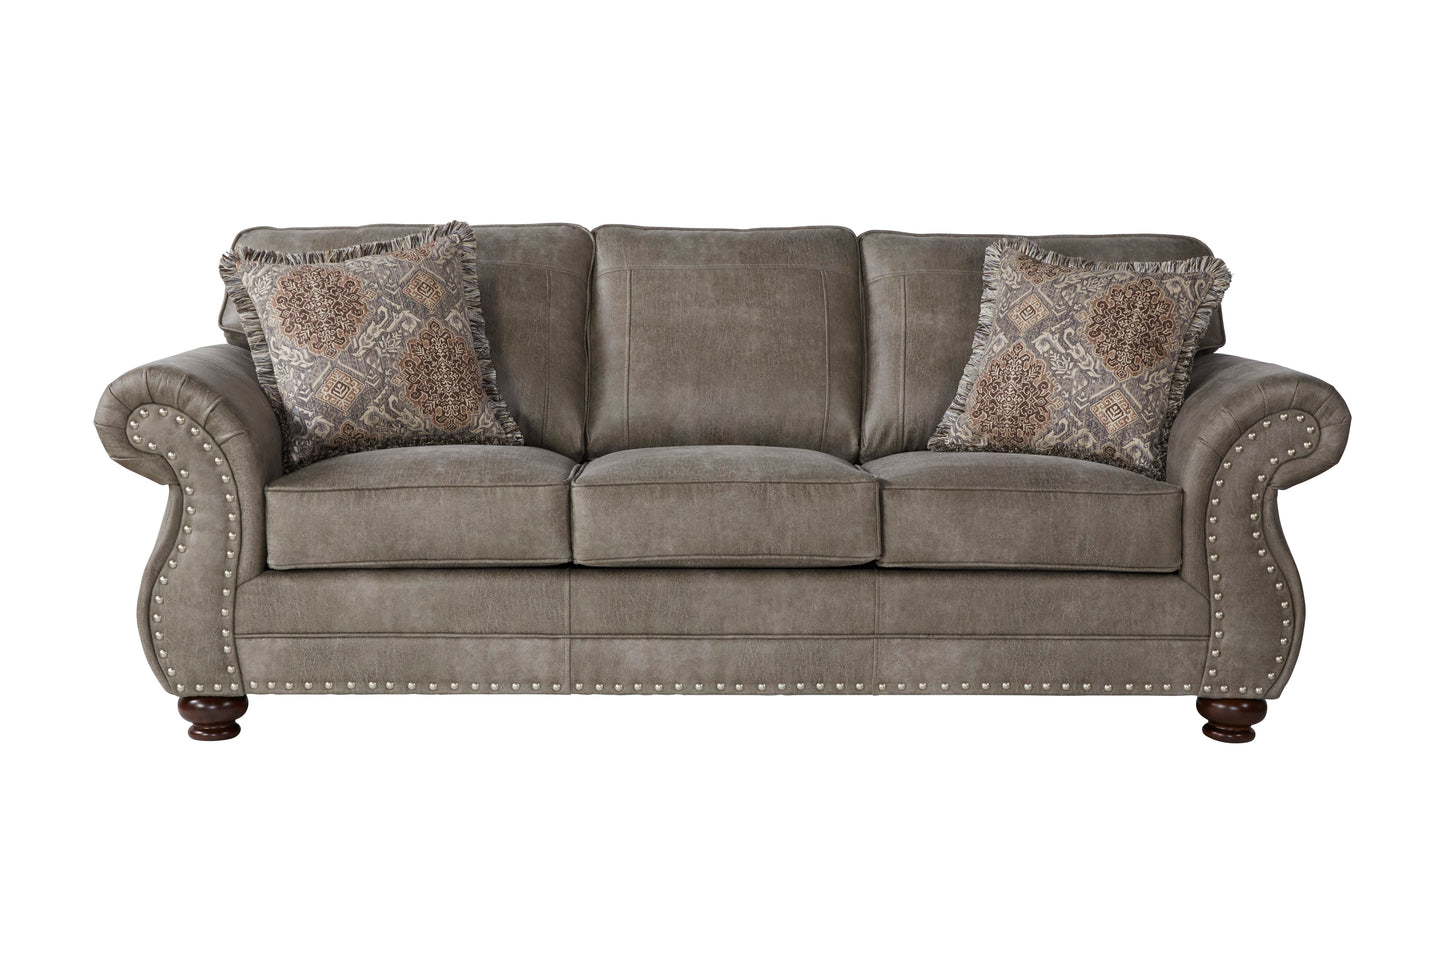 Leinster Faux Leather Upholstered Nailhead Sofa in Stone Gray